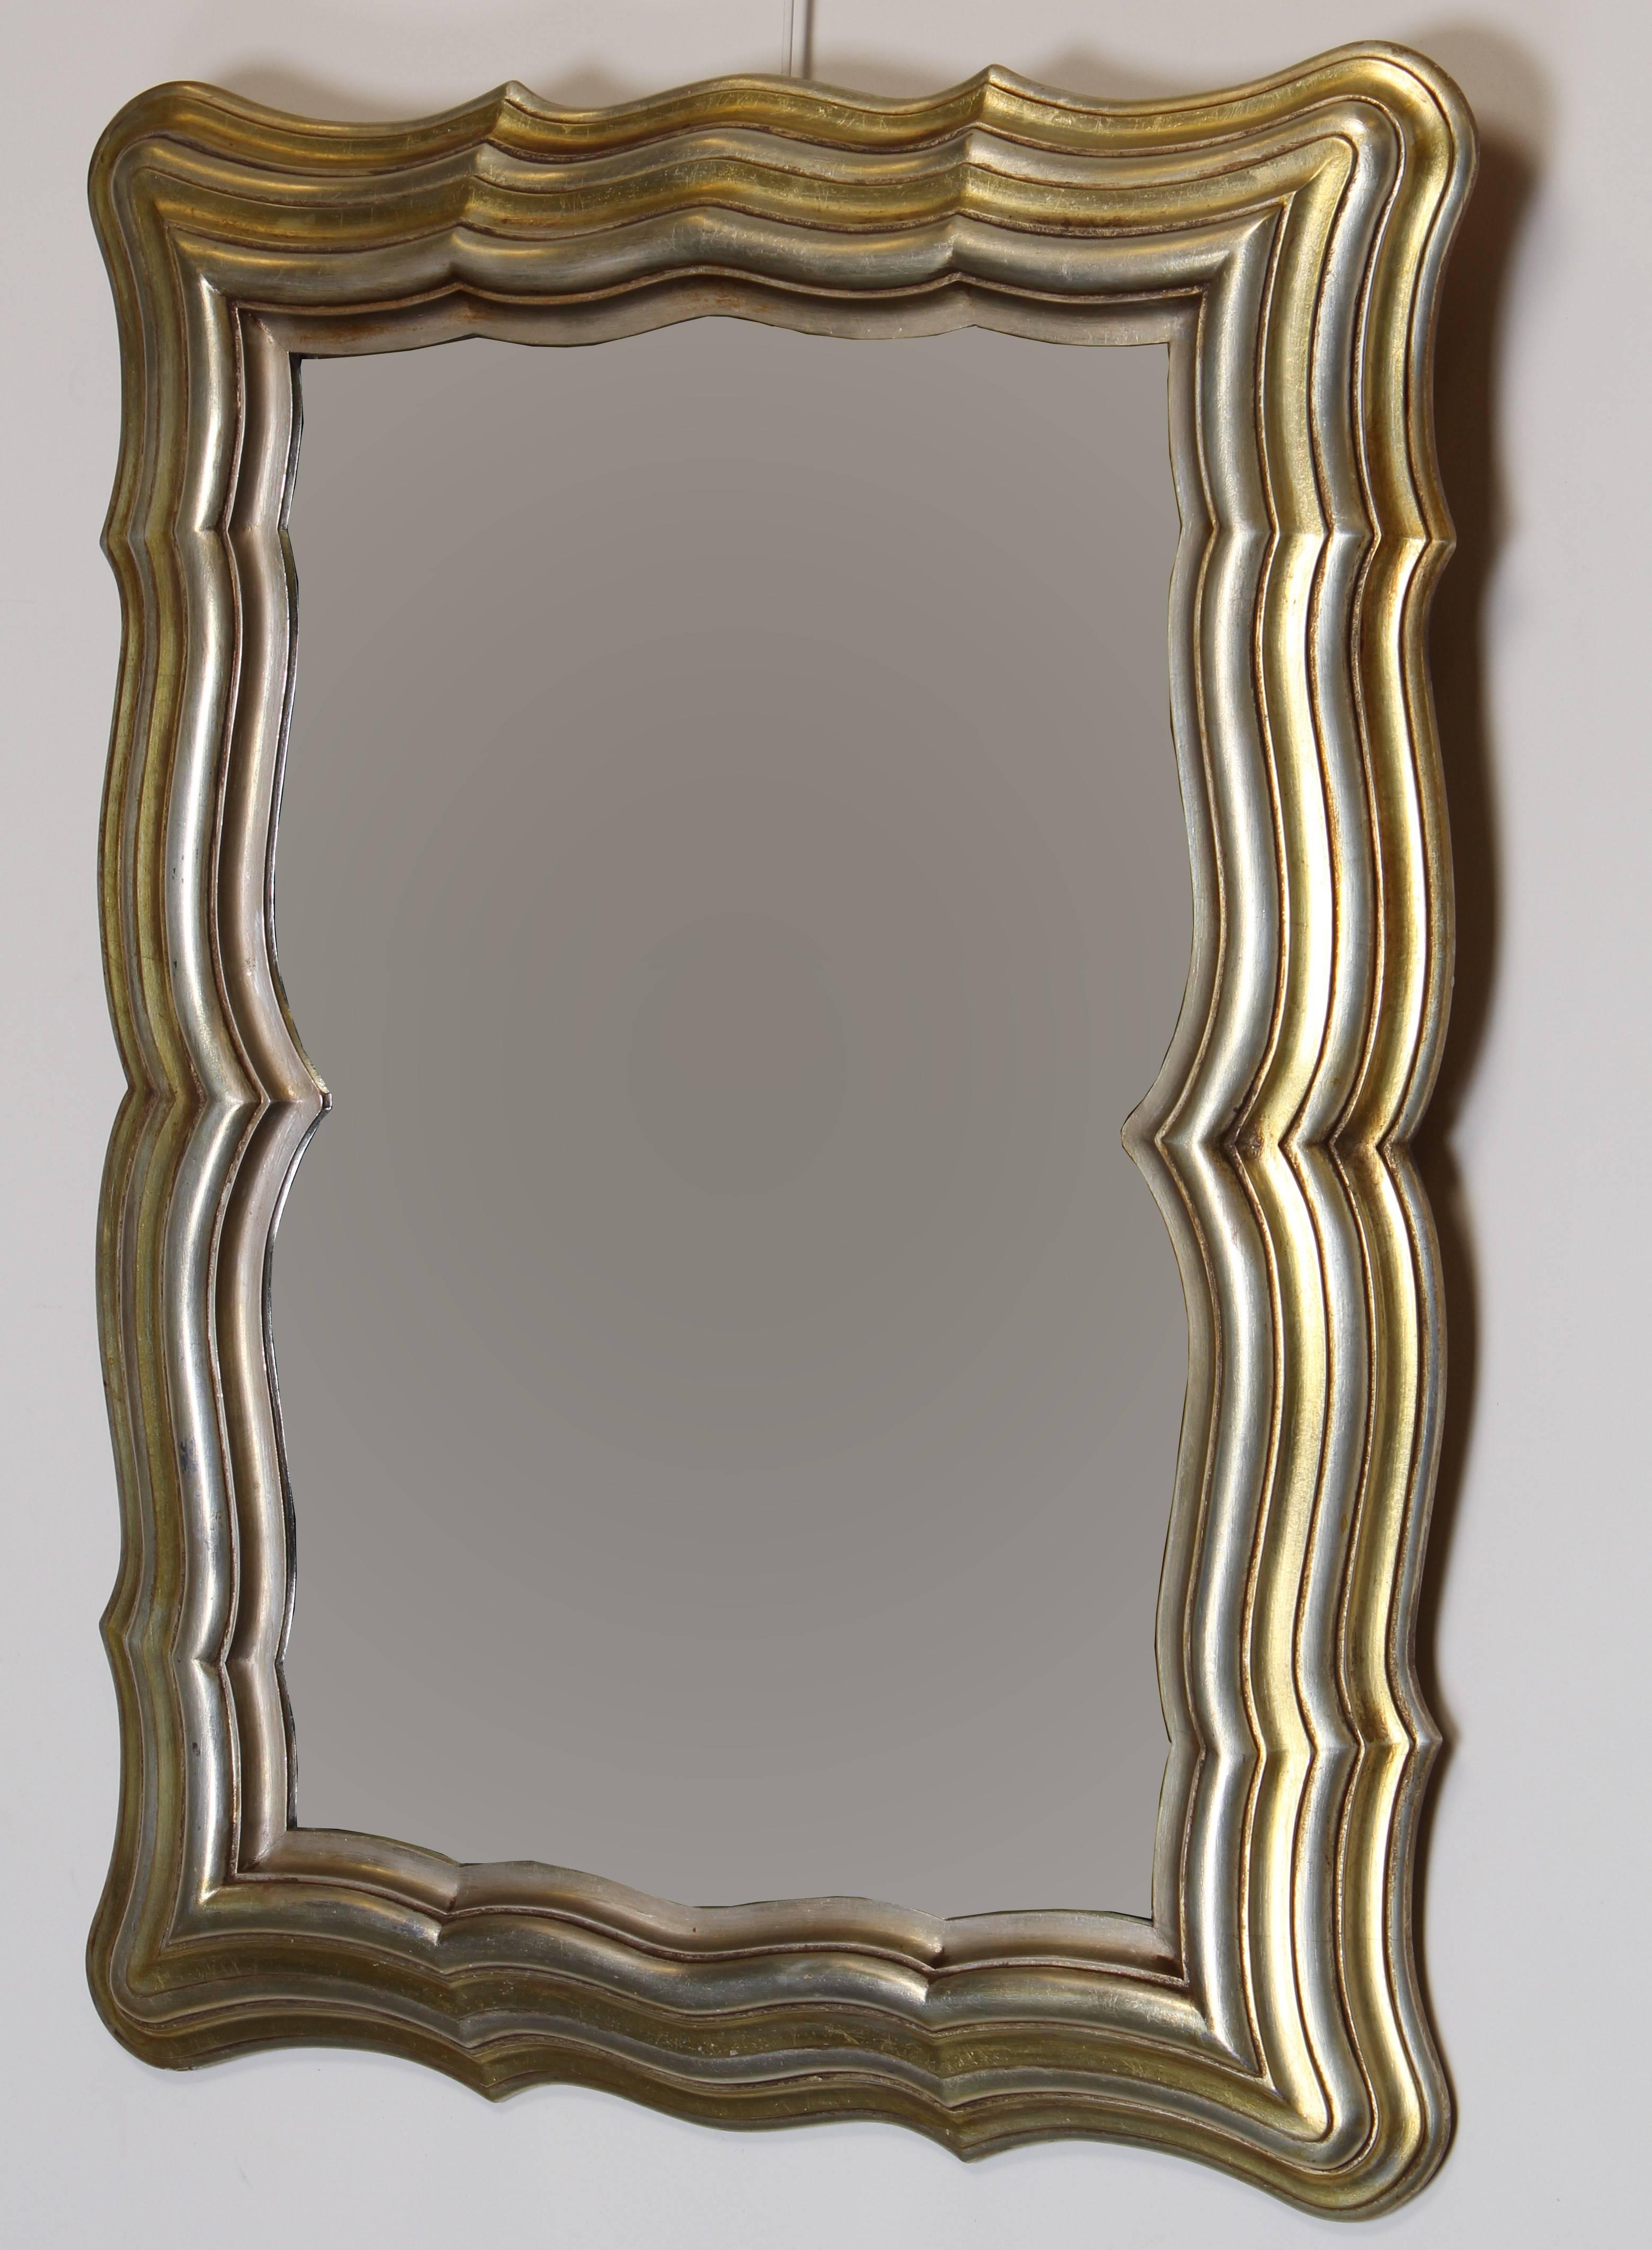 A distinctive Italian silver and gold gilt hand-carved scalloped wood mirror.

Please request shipping quotes for your specific zip code, most USA locations will be cheaper than the quoted flat rated shipping.

Dimensions: 38.25